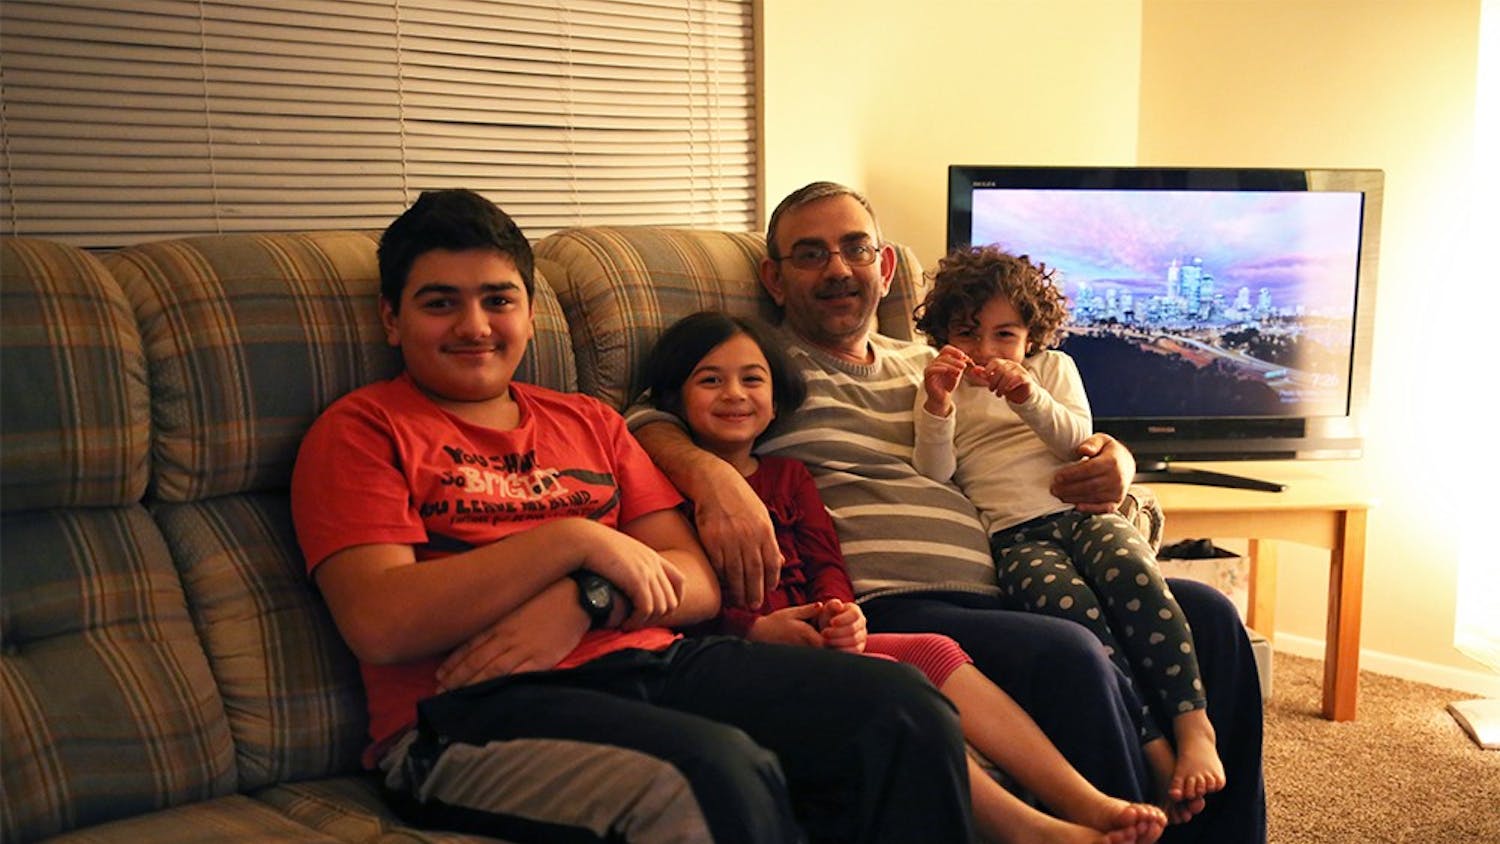 The Batman family settled in Indianapolis about a year ago after fleeing war-torn Syria in 2012. Marwan, the father, works in a restaurant to provide for his wife and four children (wife and oldest daughter not pictured). On Monday, Gov. Mike Pence called for the resettlement of additional Syrian refugees in Indiana to be suspended, following Friday's attack in Paris carried out by ISIS. More than 20 states announced similar plans. 